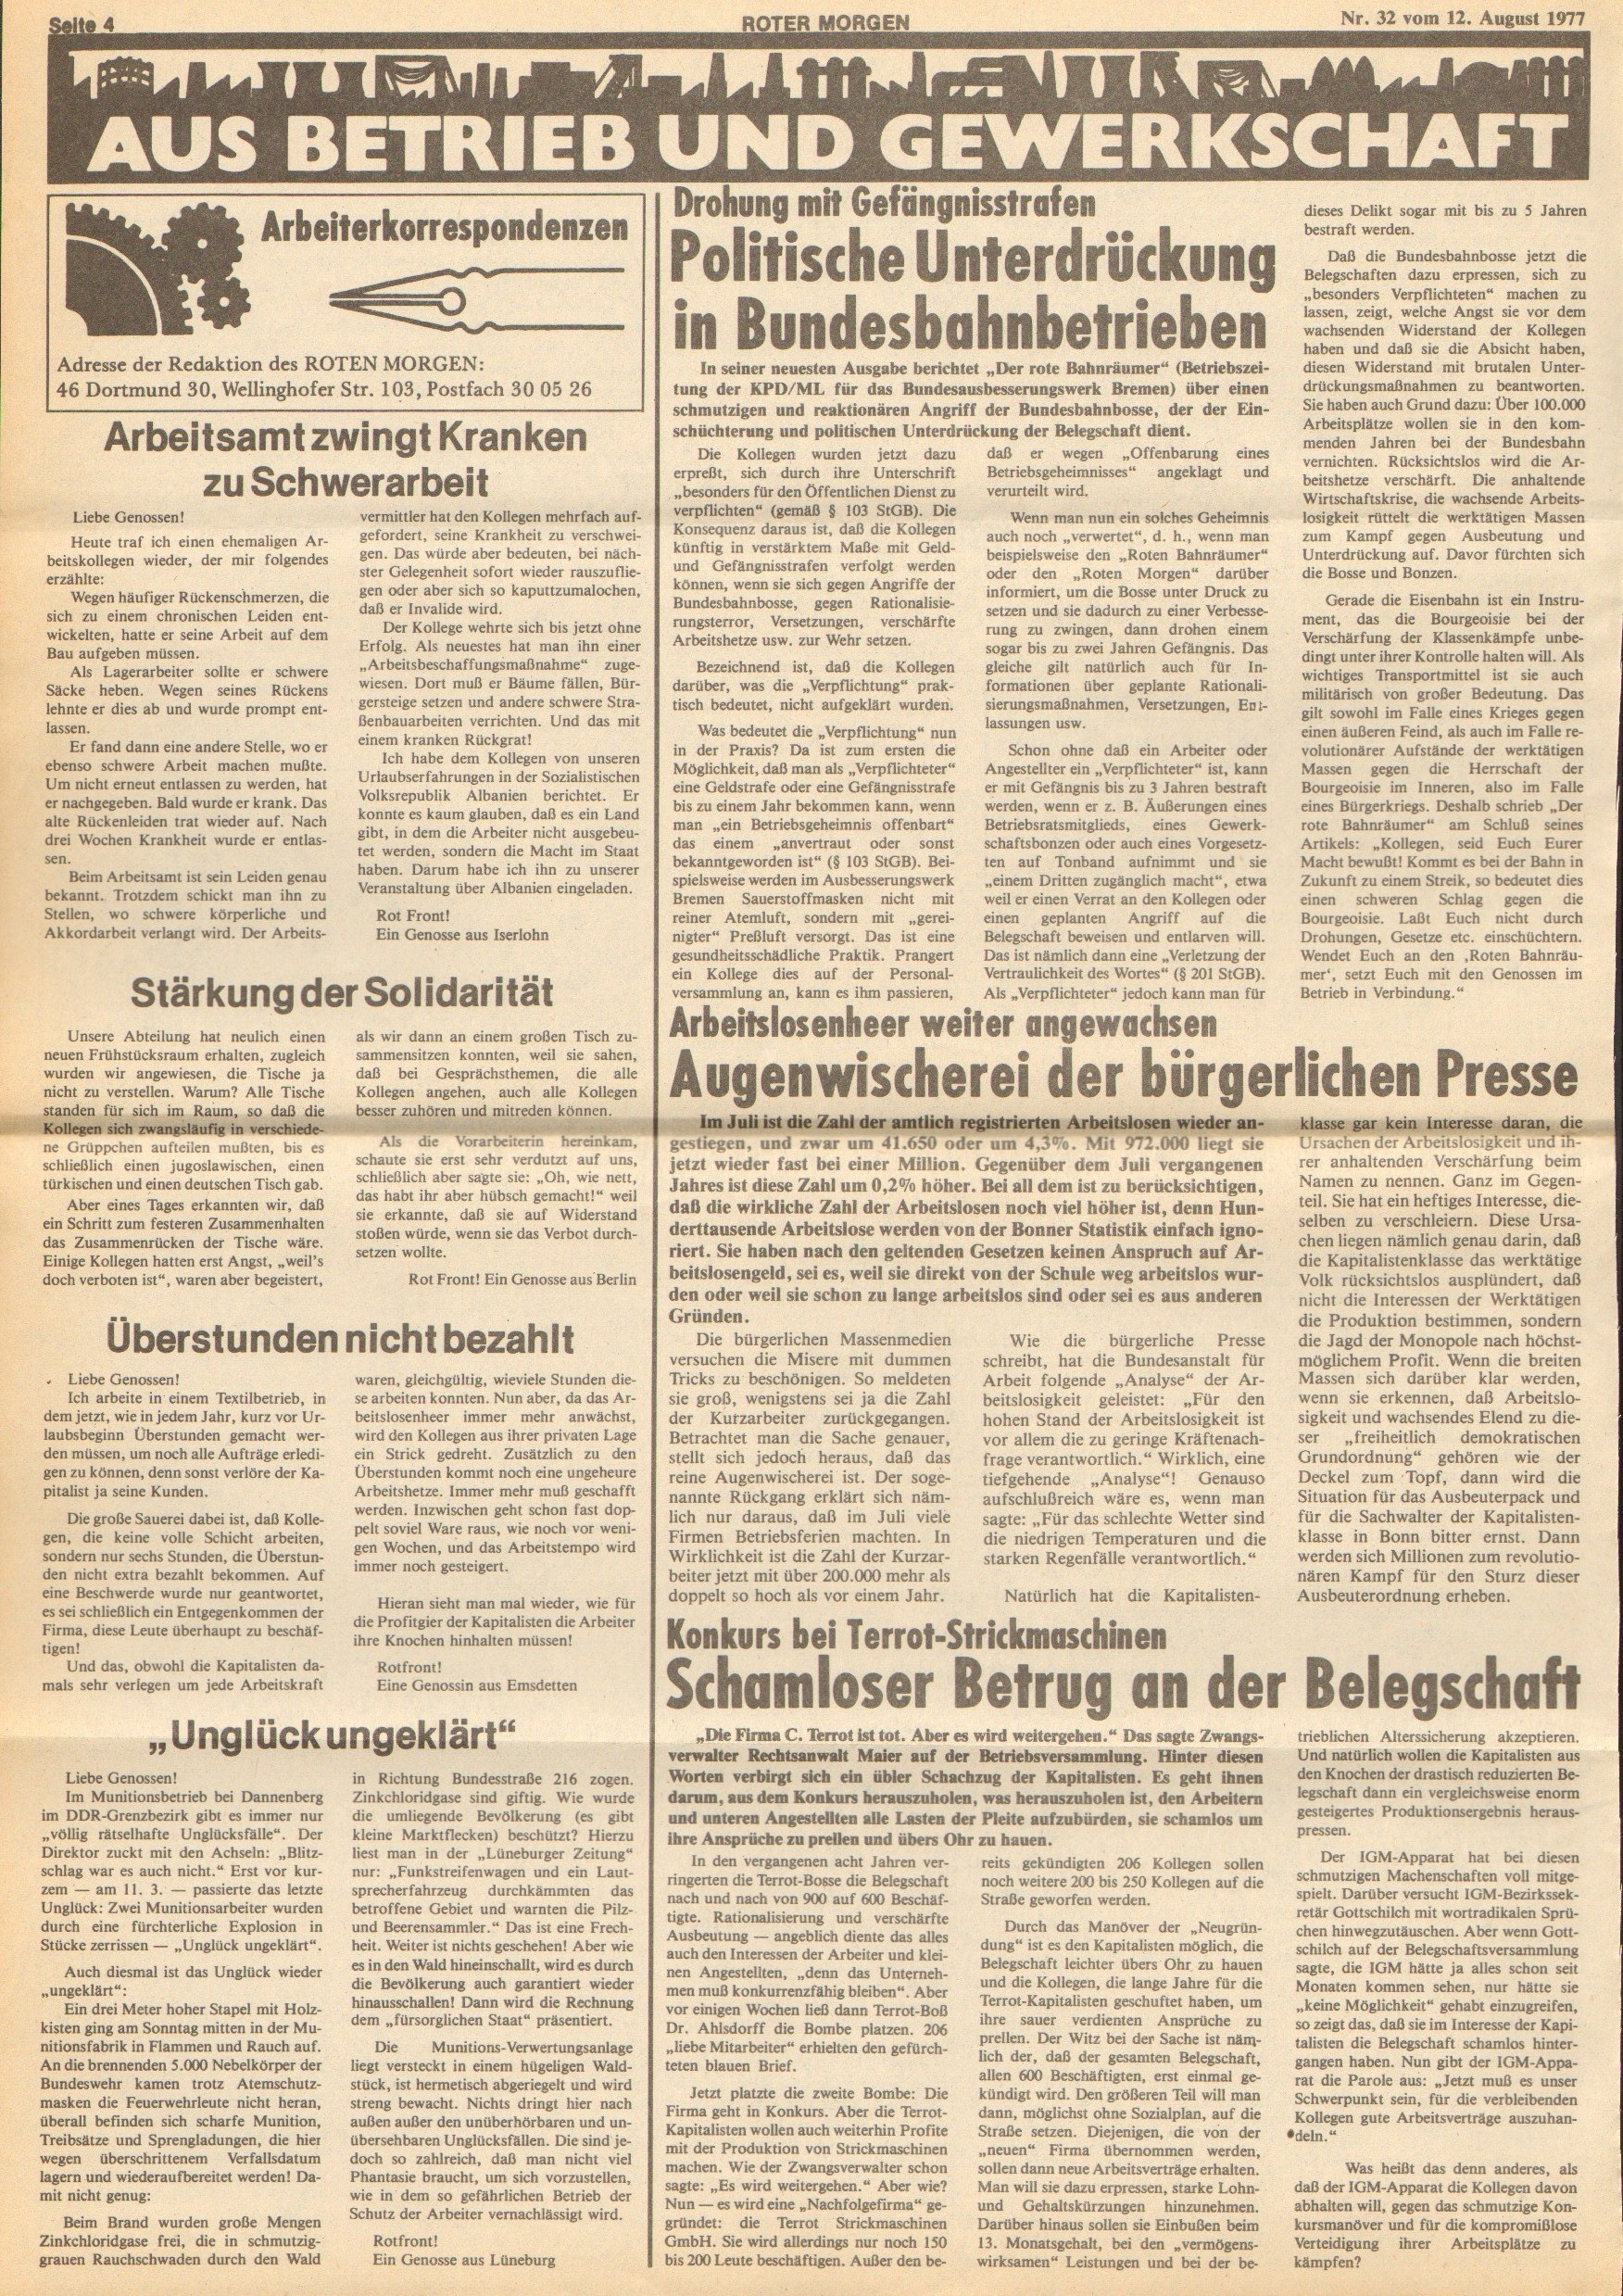 Roter Morgen, 11. Jg., 12. August 1977, Nr. 32, Seite 4